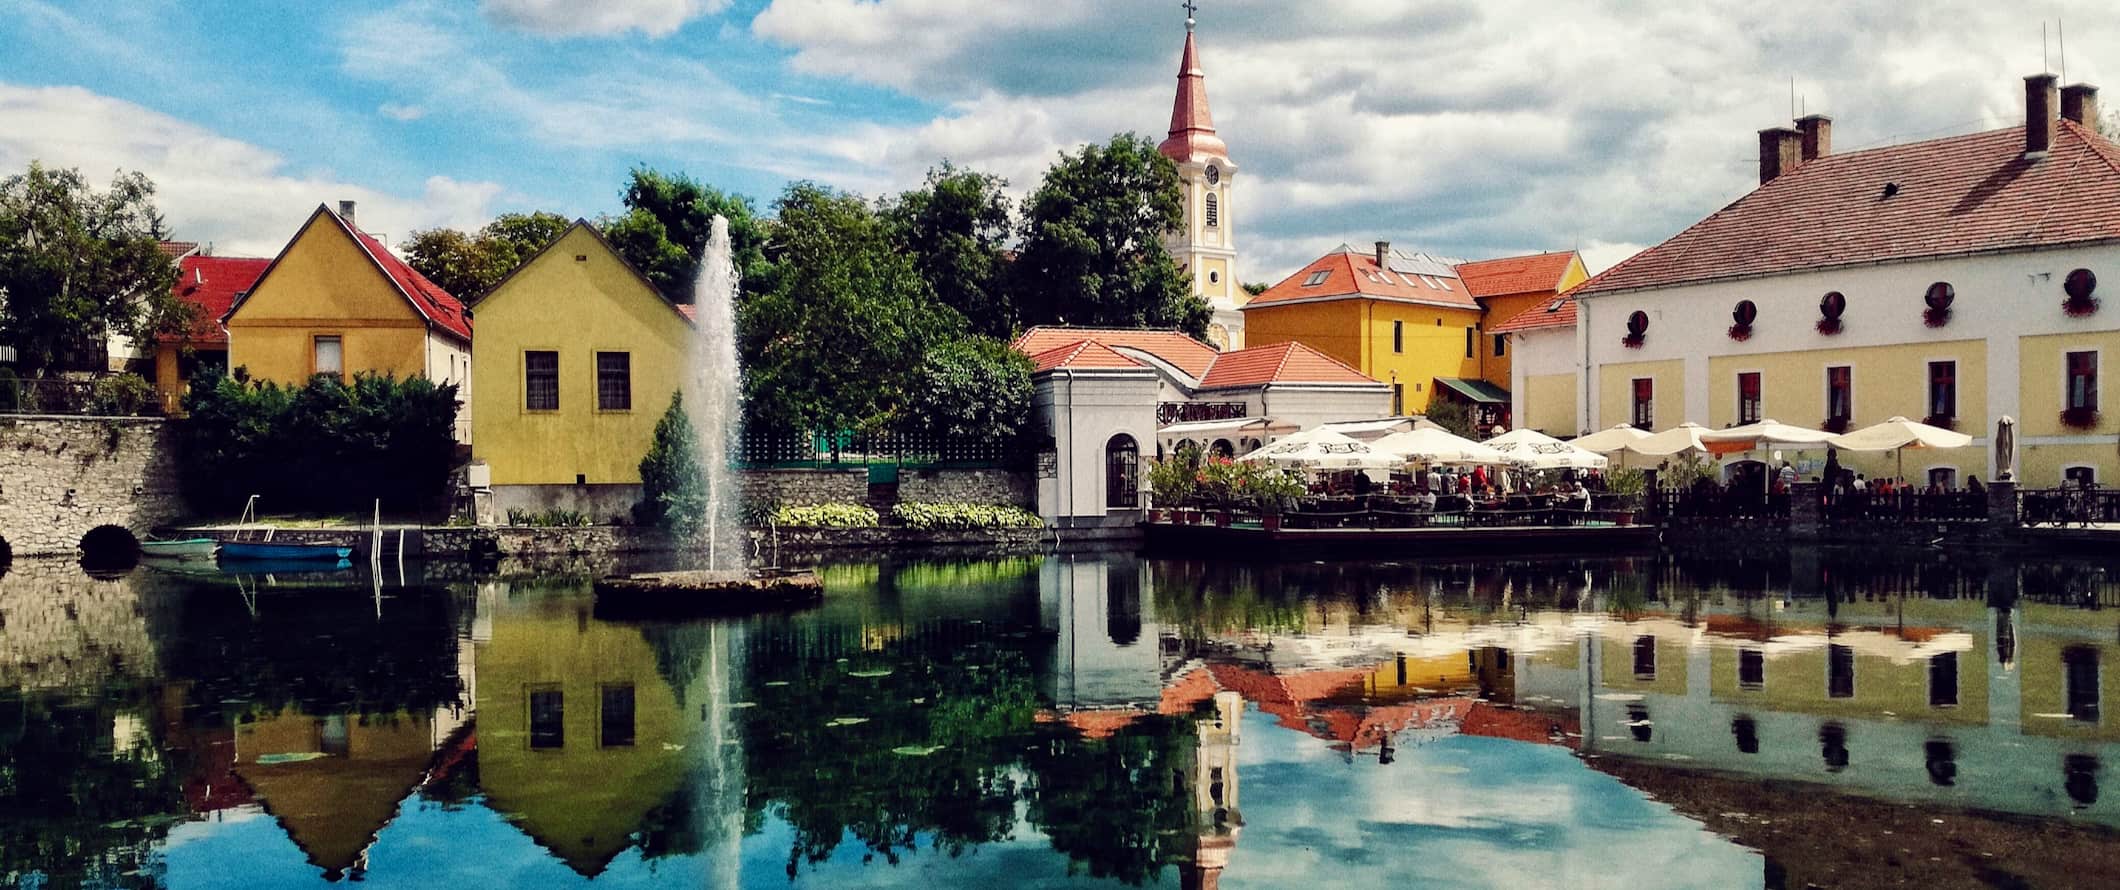 a colorful and historic town in Hungary, with a reflection over the calm waters